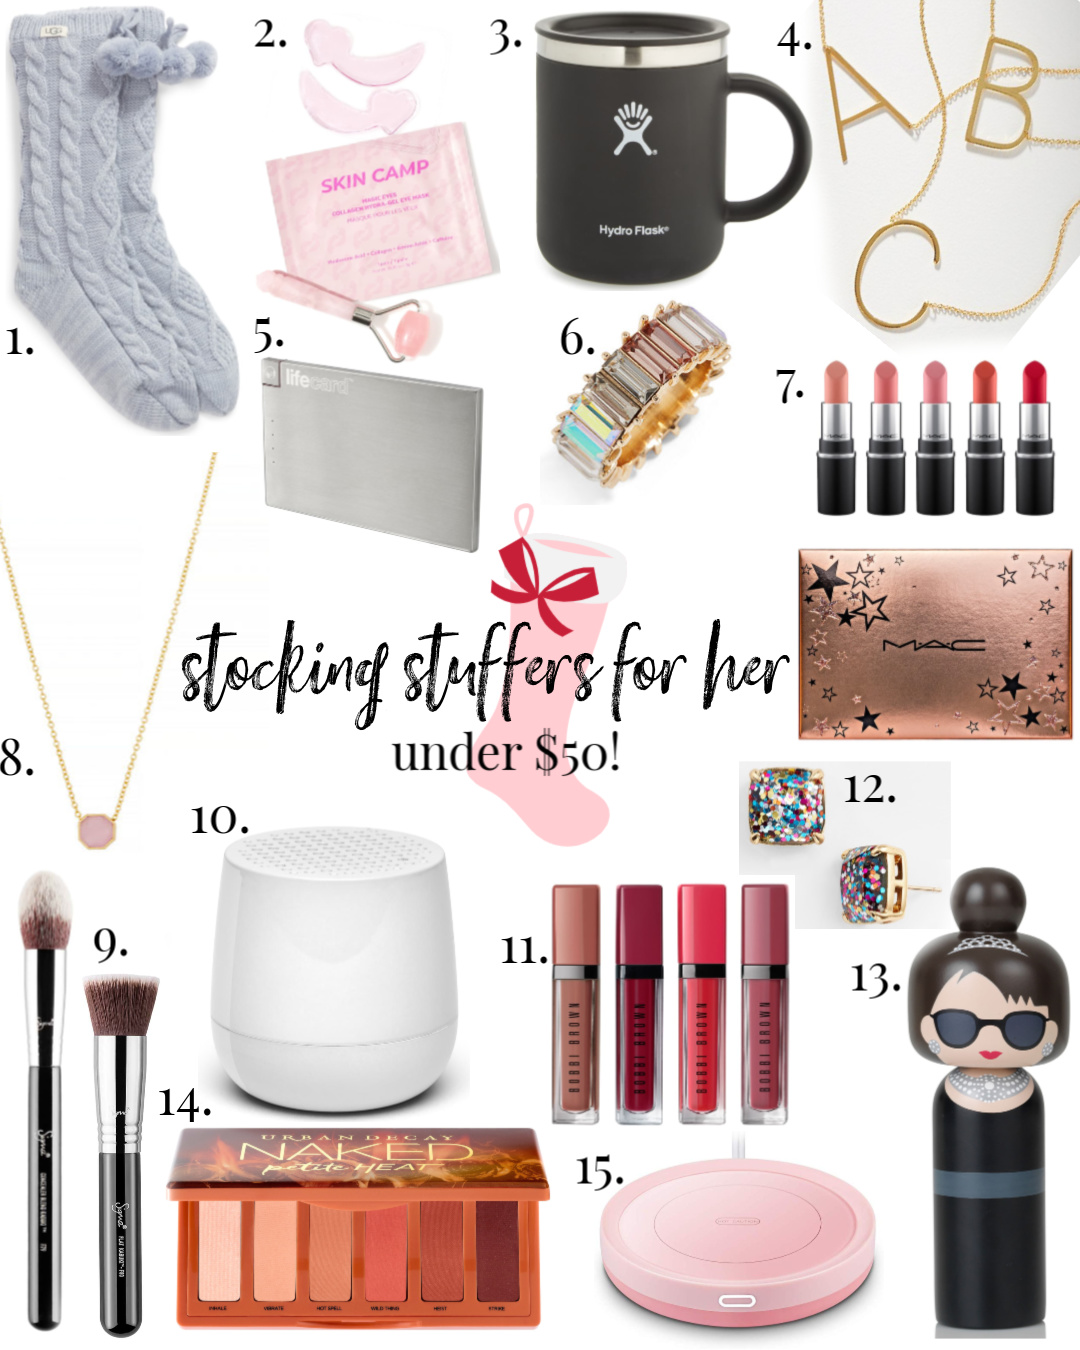 Stocking Stuffer Gift Ideas for her under $50, Gift Guide for women under $50, fun stocking stuffers